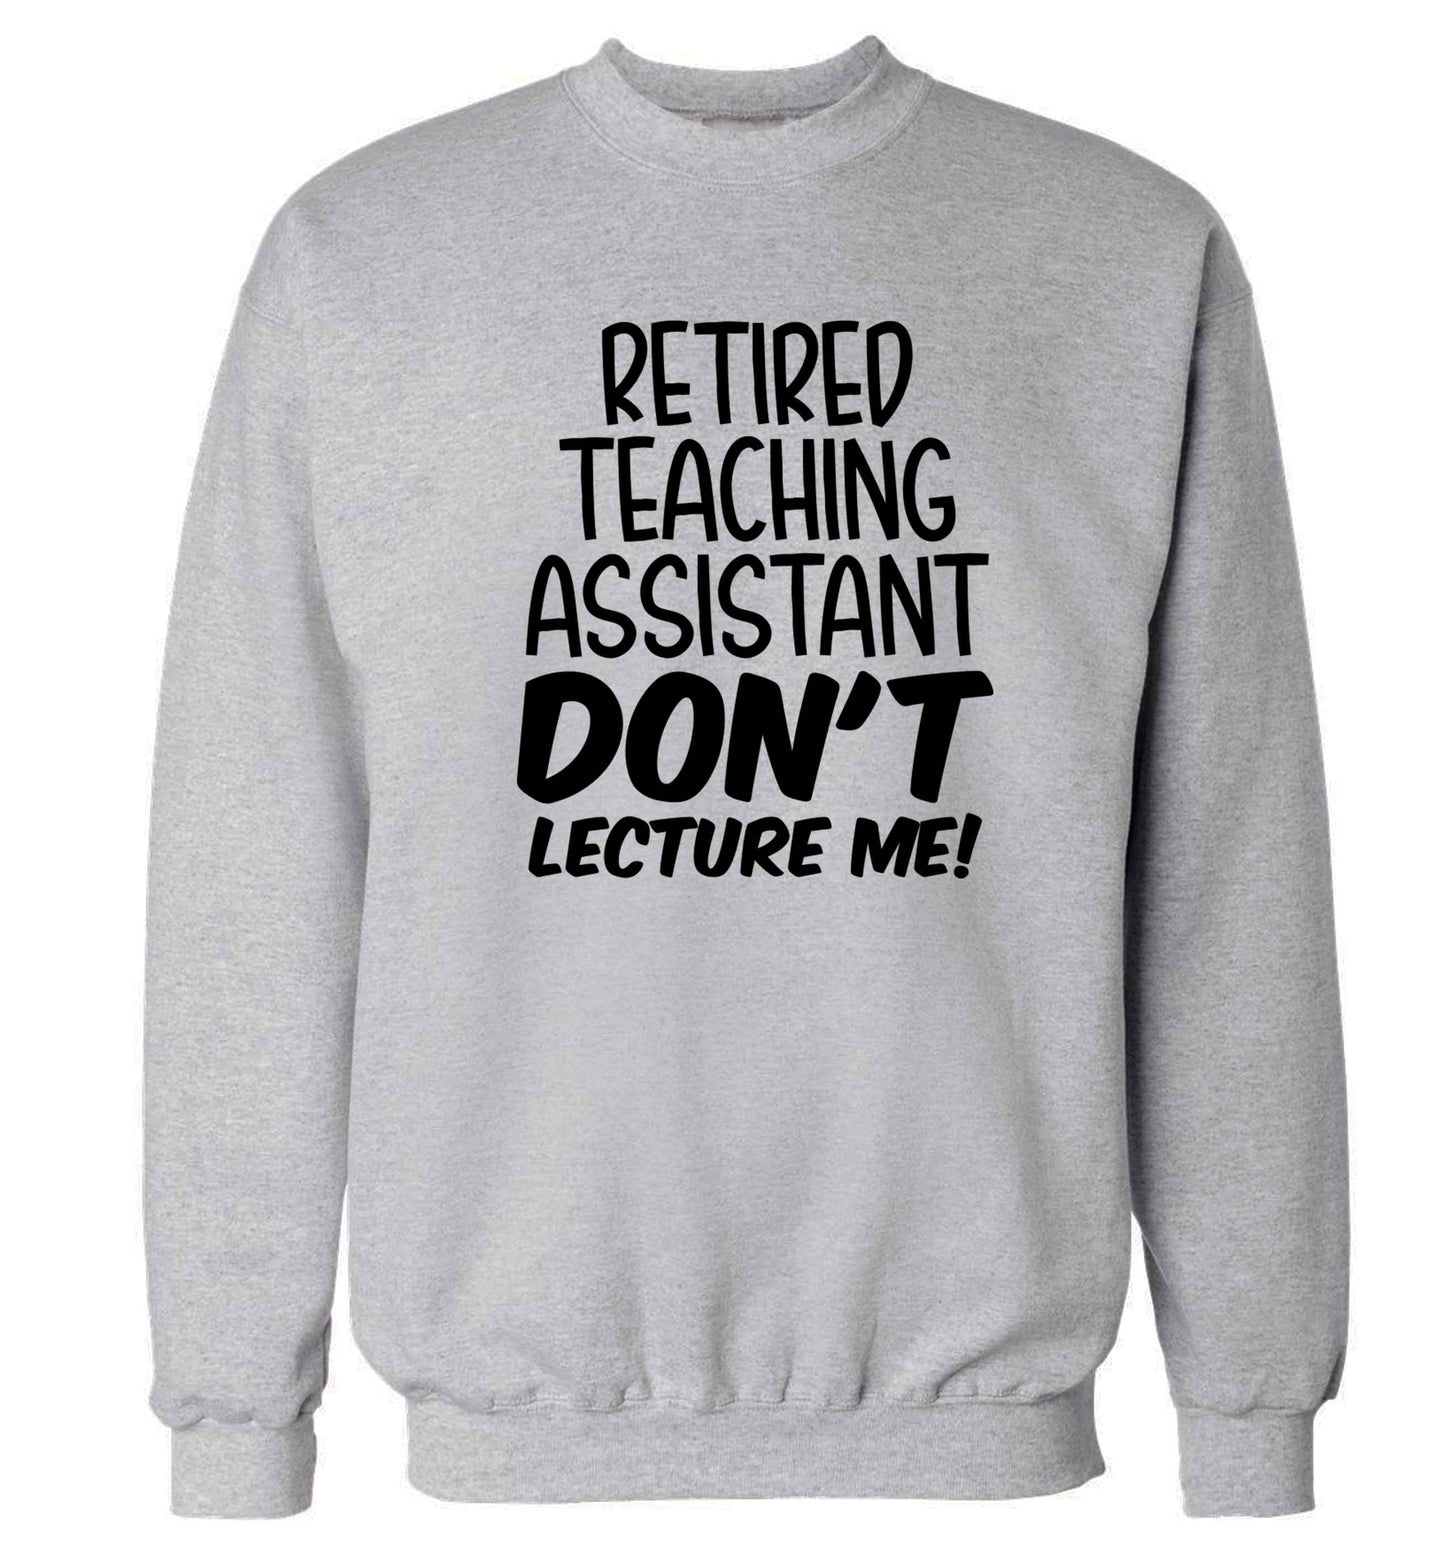 Retired teaching assistant don't lecture me Adult's unisex grey Sweater 2XL